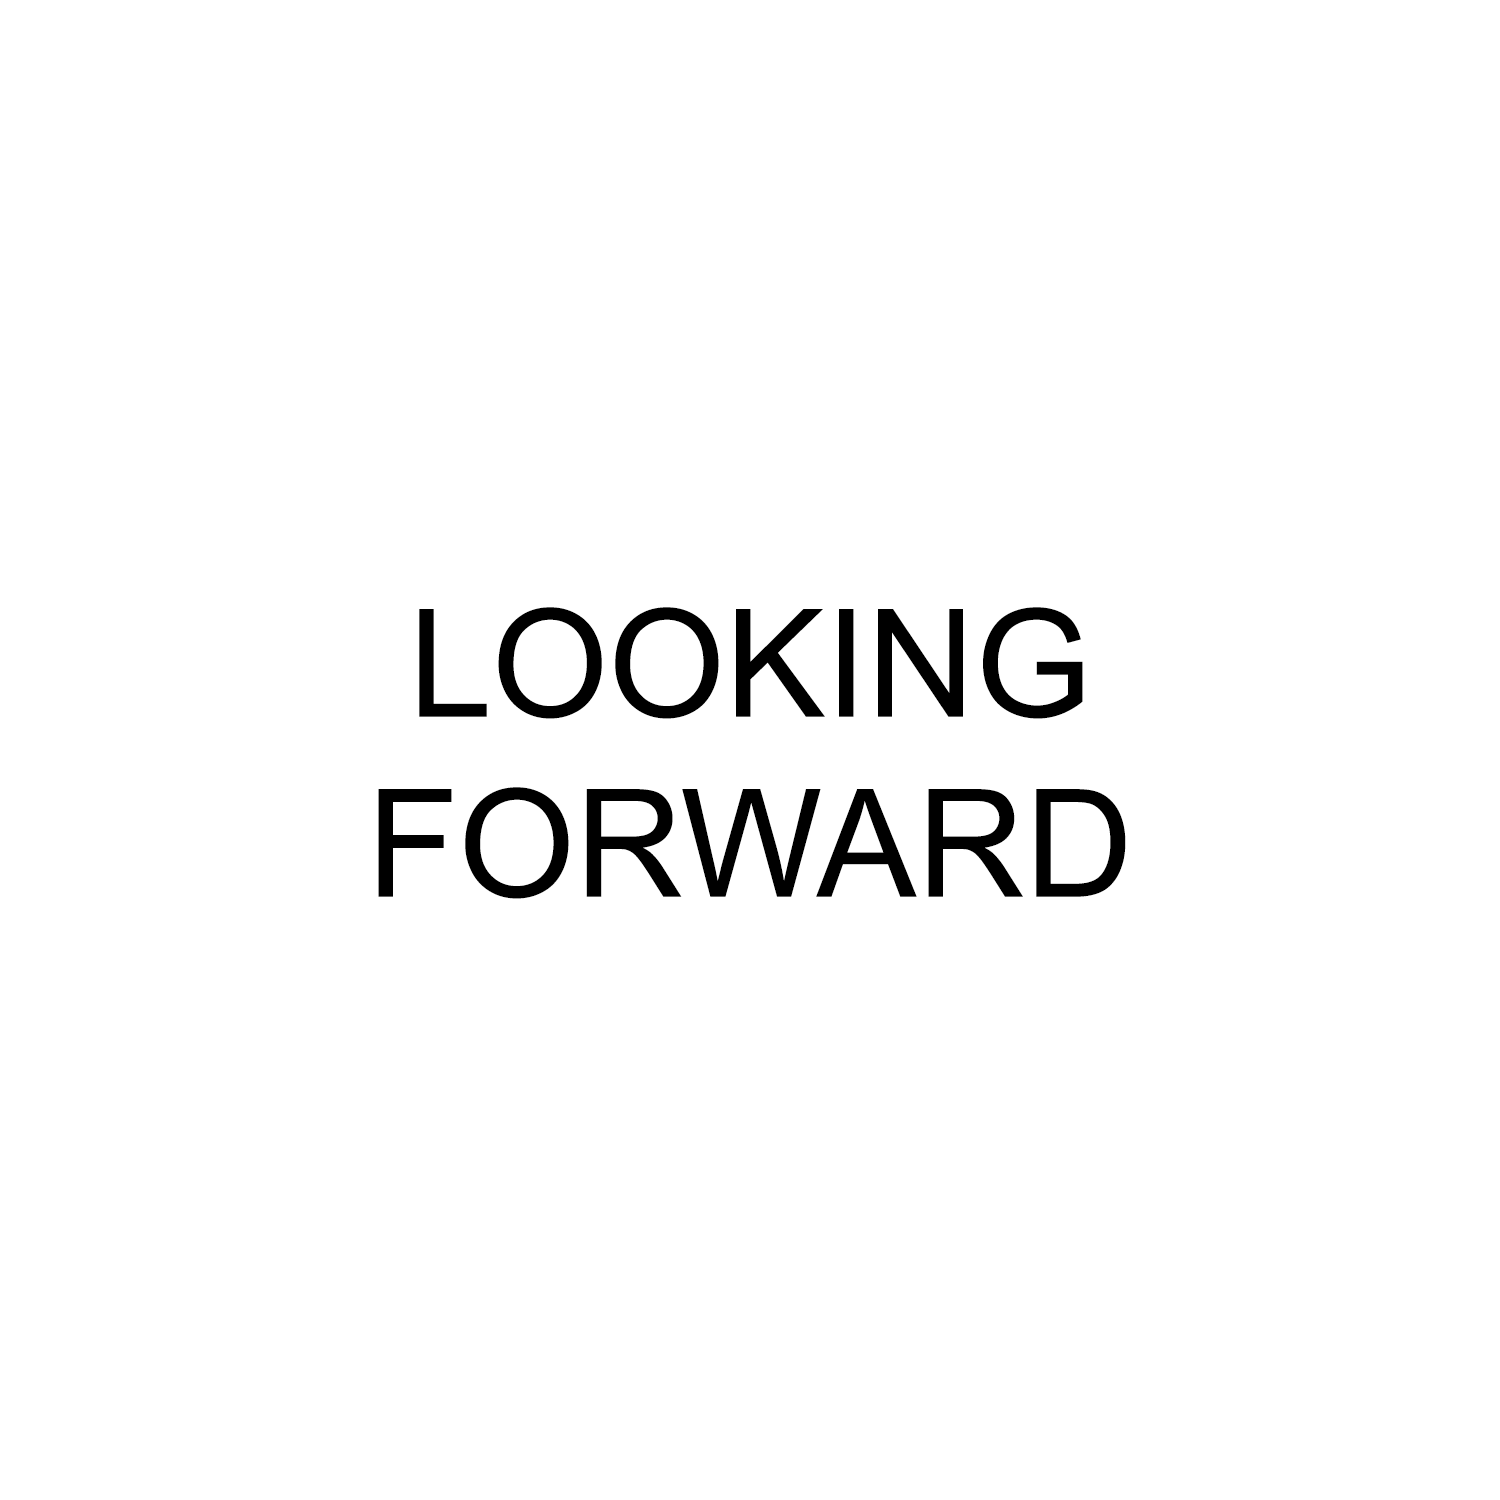 Looking Forward button